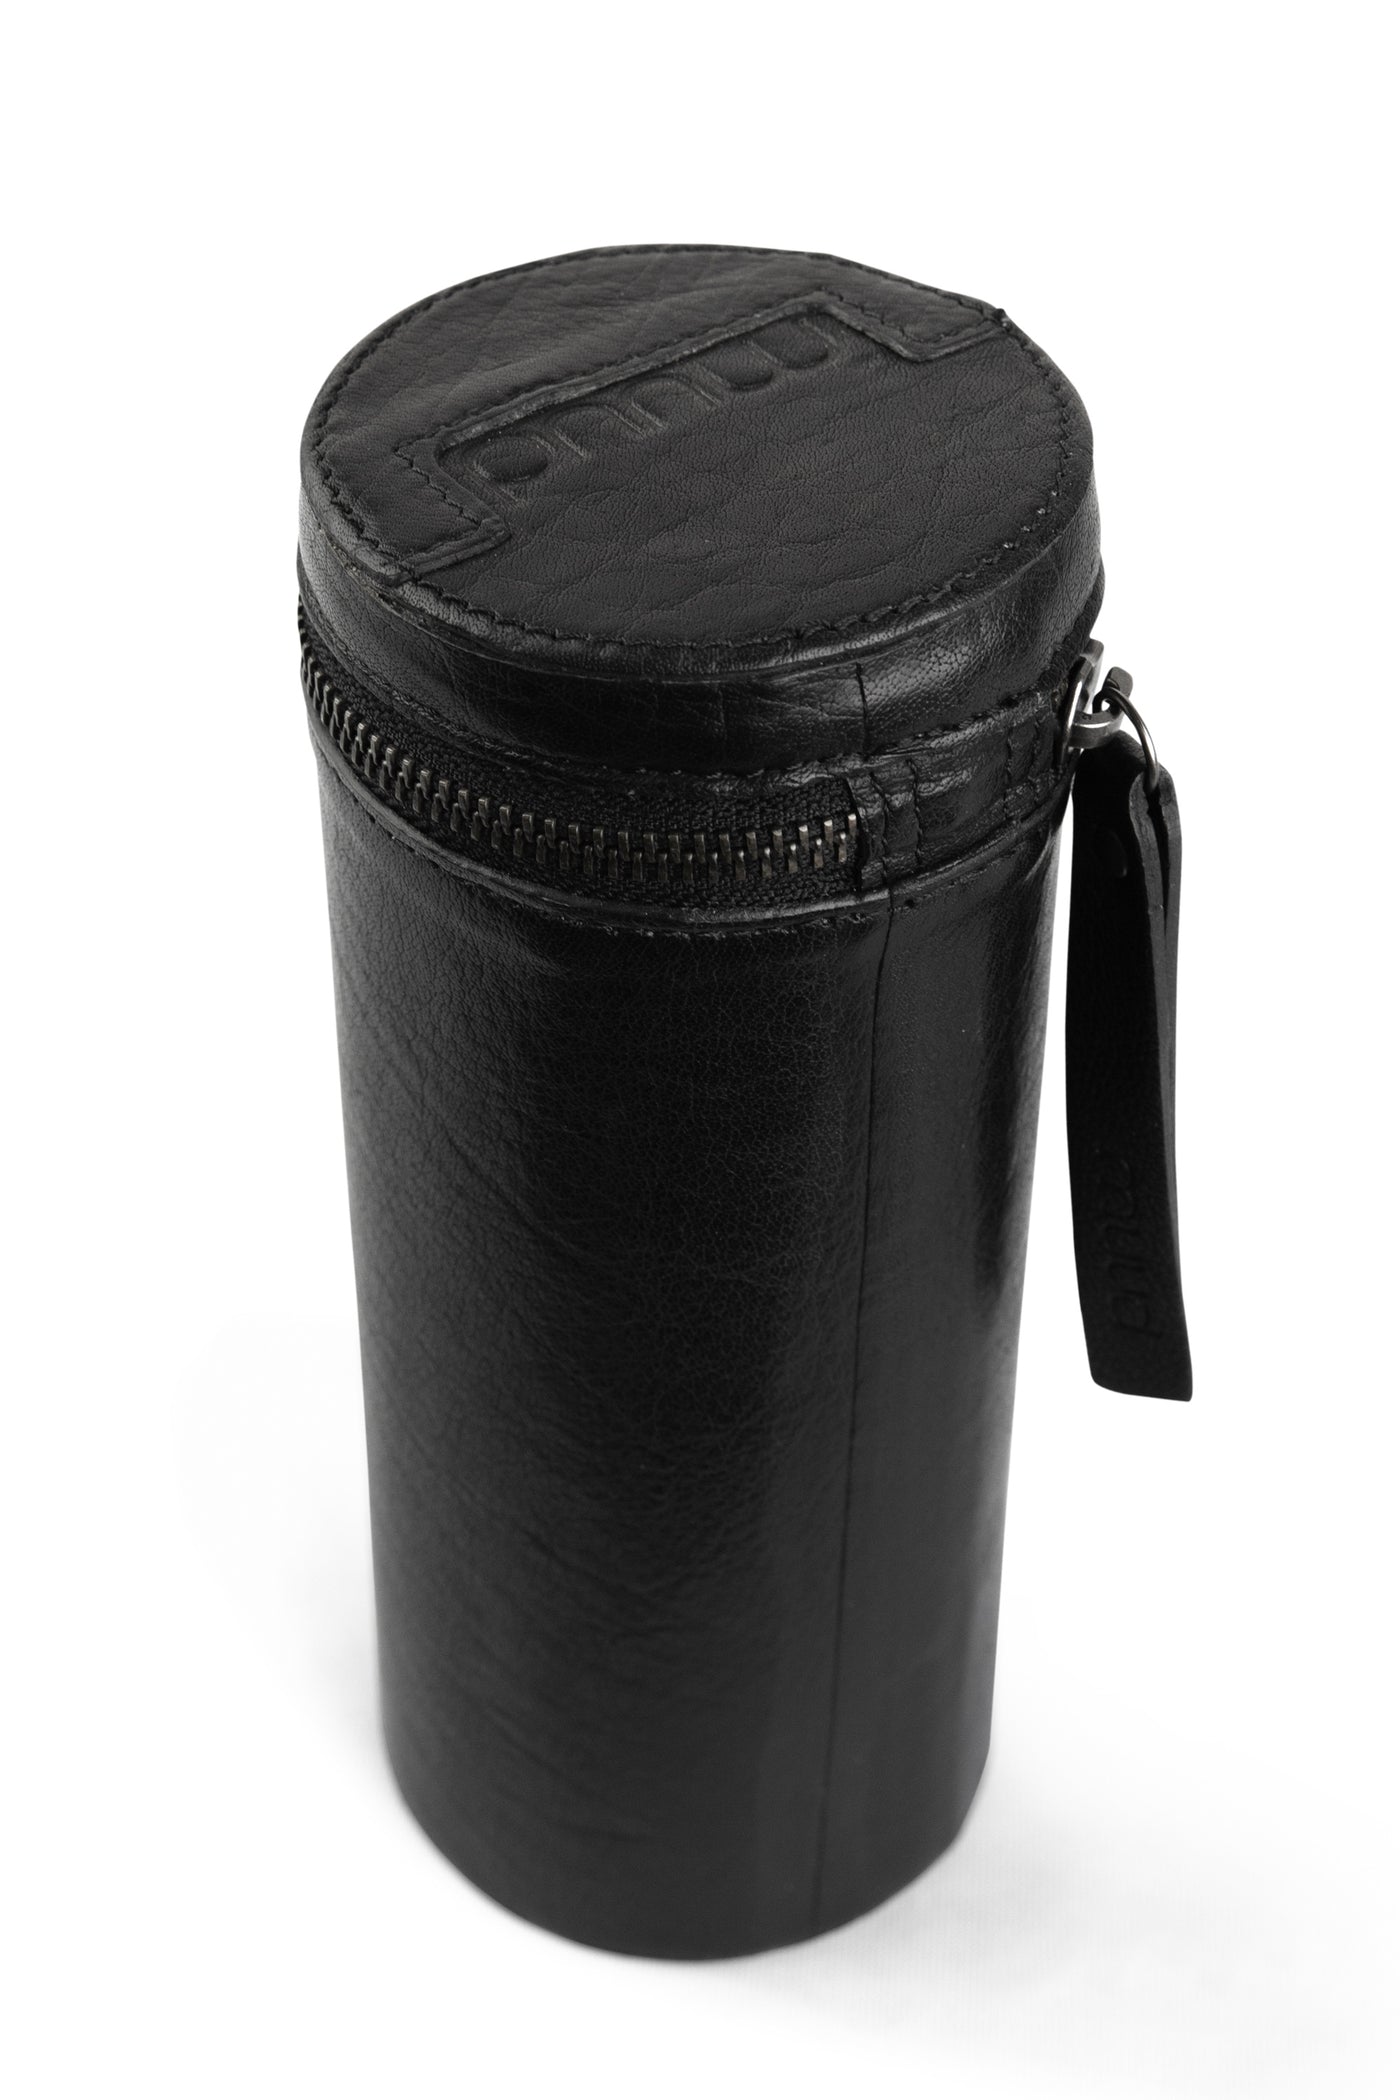 muud Holly Canister Kampagne Black